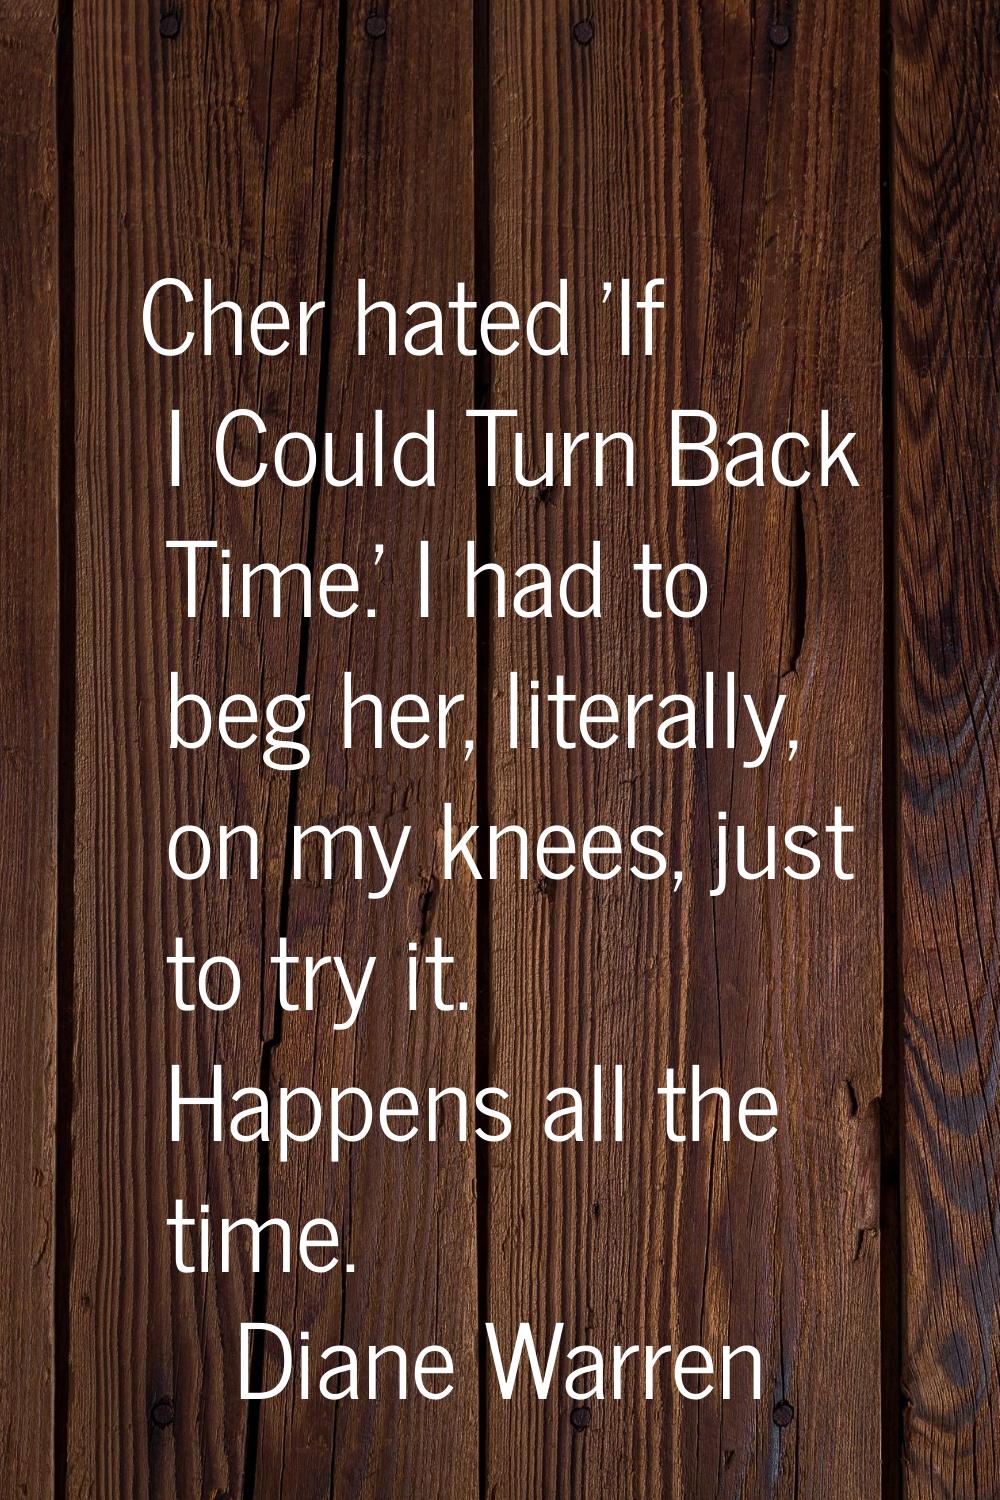 Cher hated 'If I Could Turn Back Time.' I had to beg her, literally, on my knees, just to try it. H